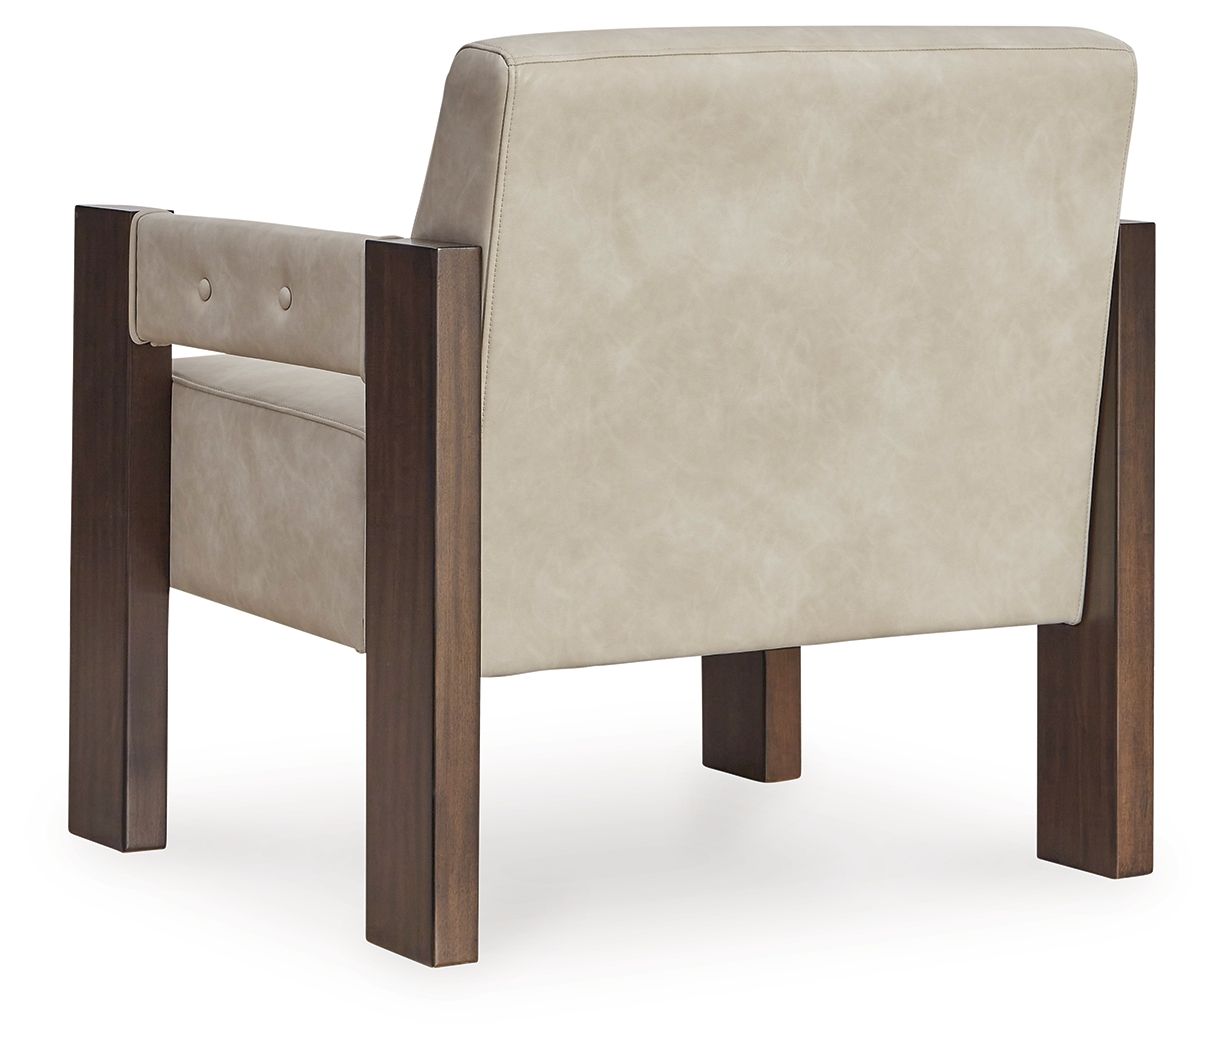 Adlanlock - Accent Chair - Tony's Home Furnishings